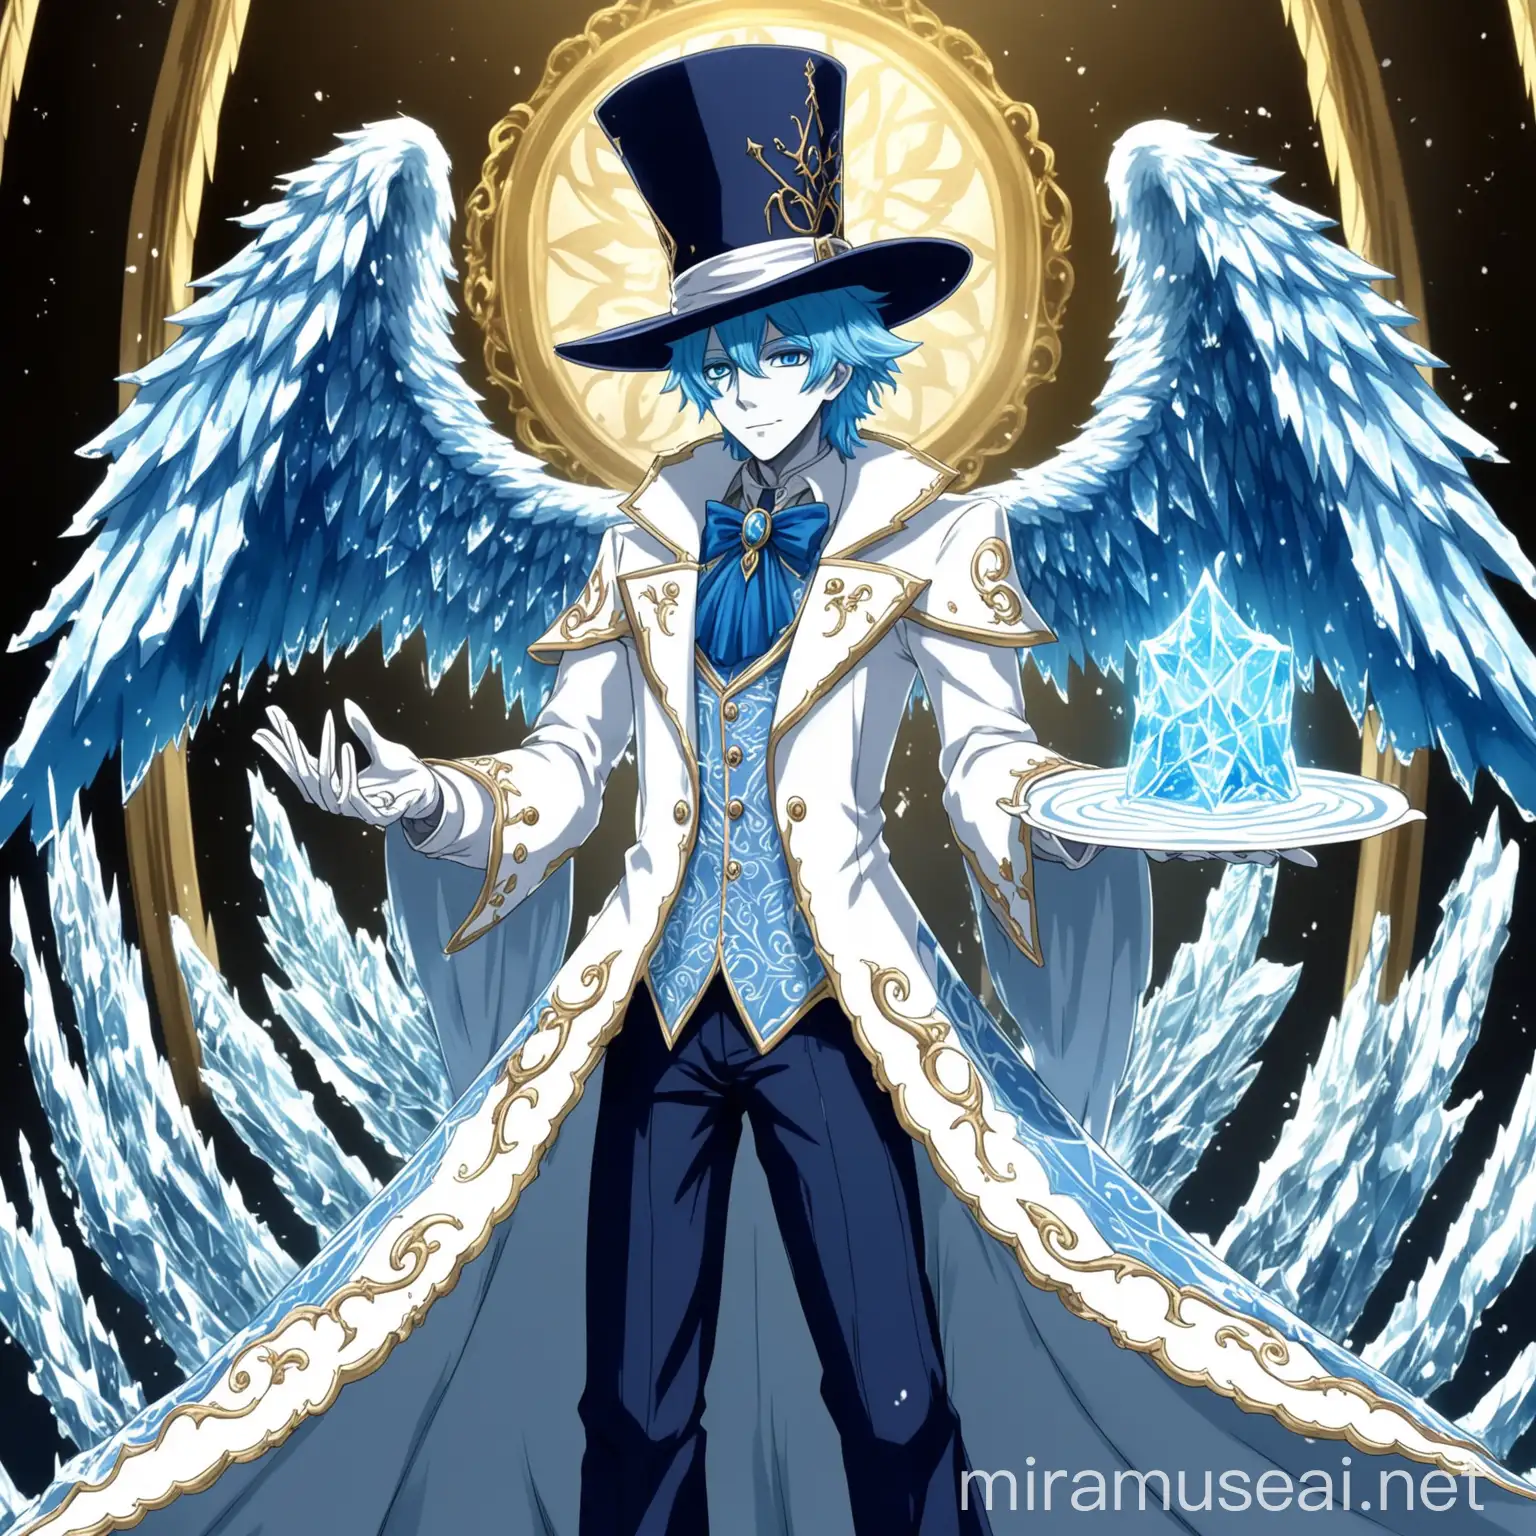 A (((half elemental creature of ice))), its other half representing an ethereal ((angel)), serving as the regent of a (((Gothic Fantasy Magician Academy))). He is garbed in an elegant (((white and light blue magician's dress))), accessorized with a matching magician's hat. in anime